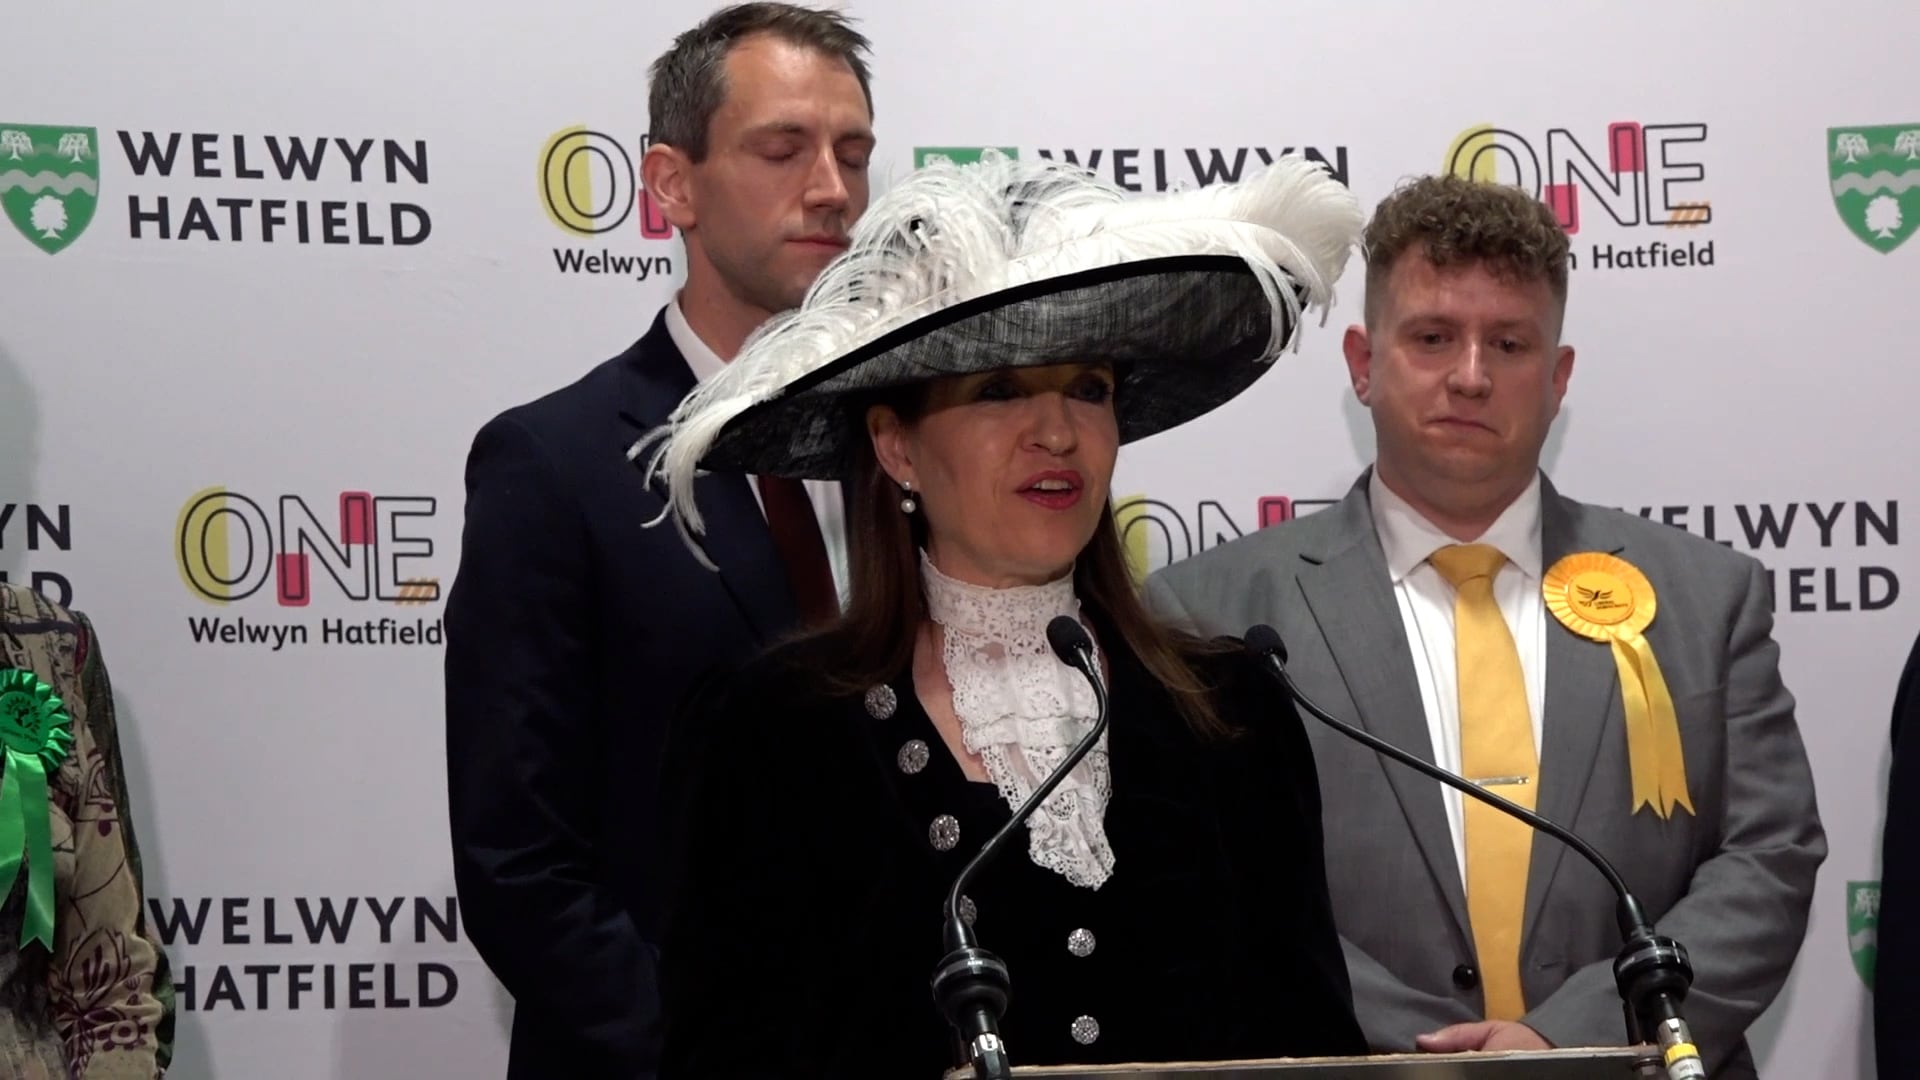 Returning officer Annie Brewster donned a large brimmed hat to declare the result for Welwyn Hatfield